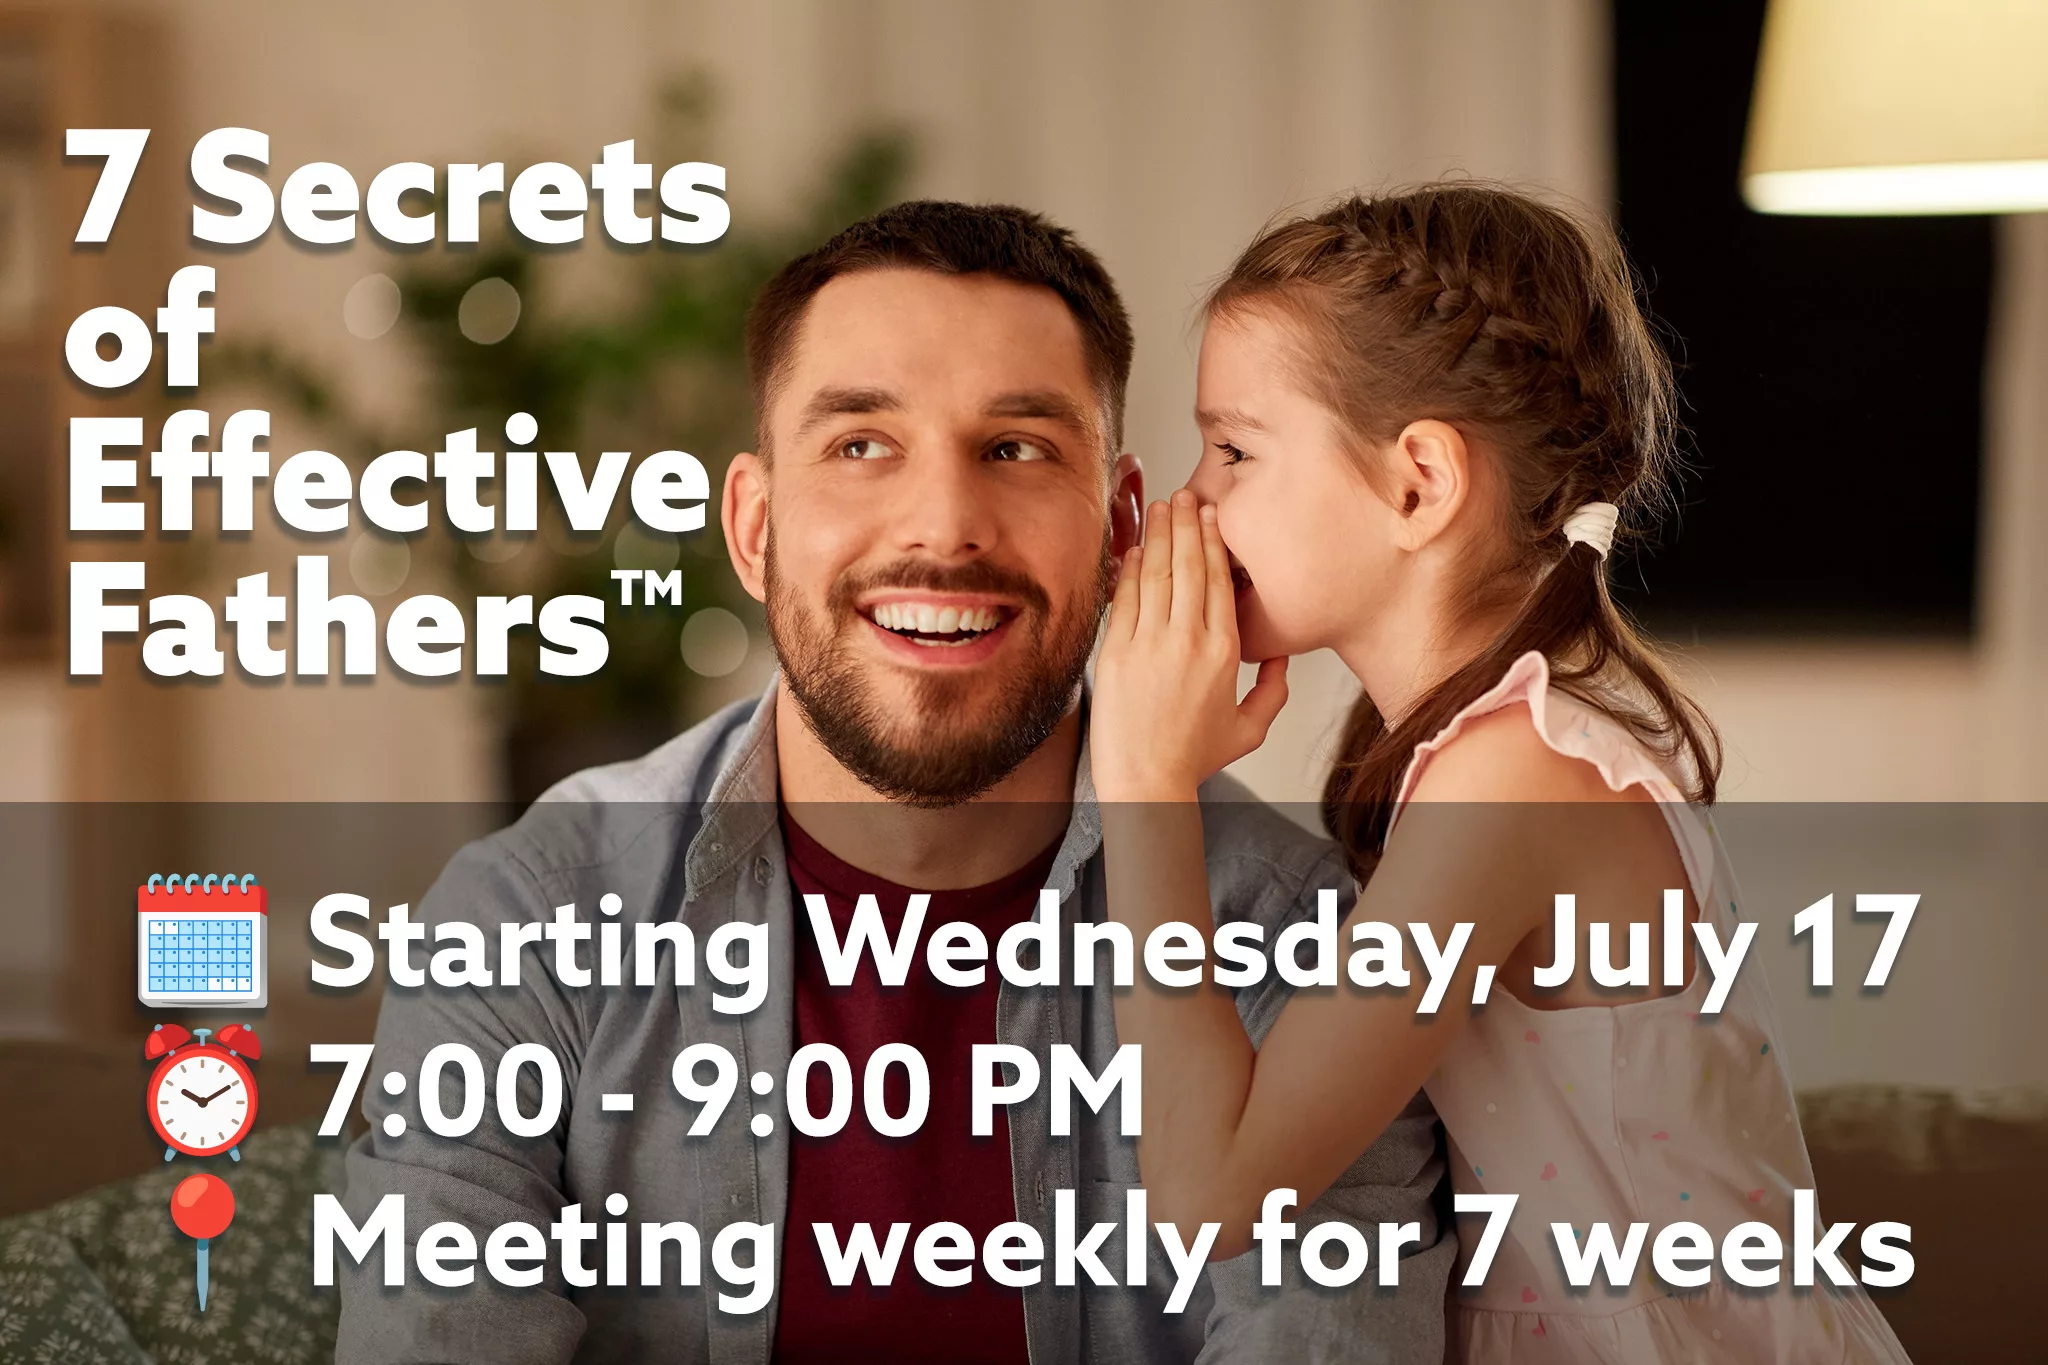 Discover the 7 Secrets of Effective Fathers – Class Starts July 17!